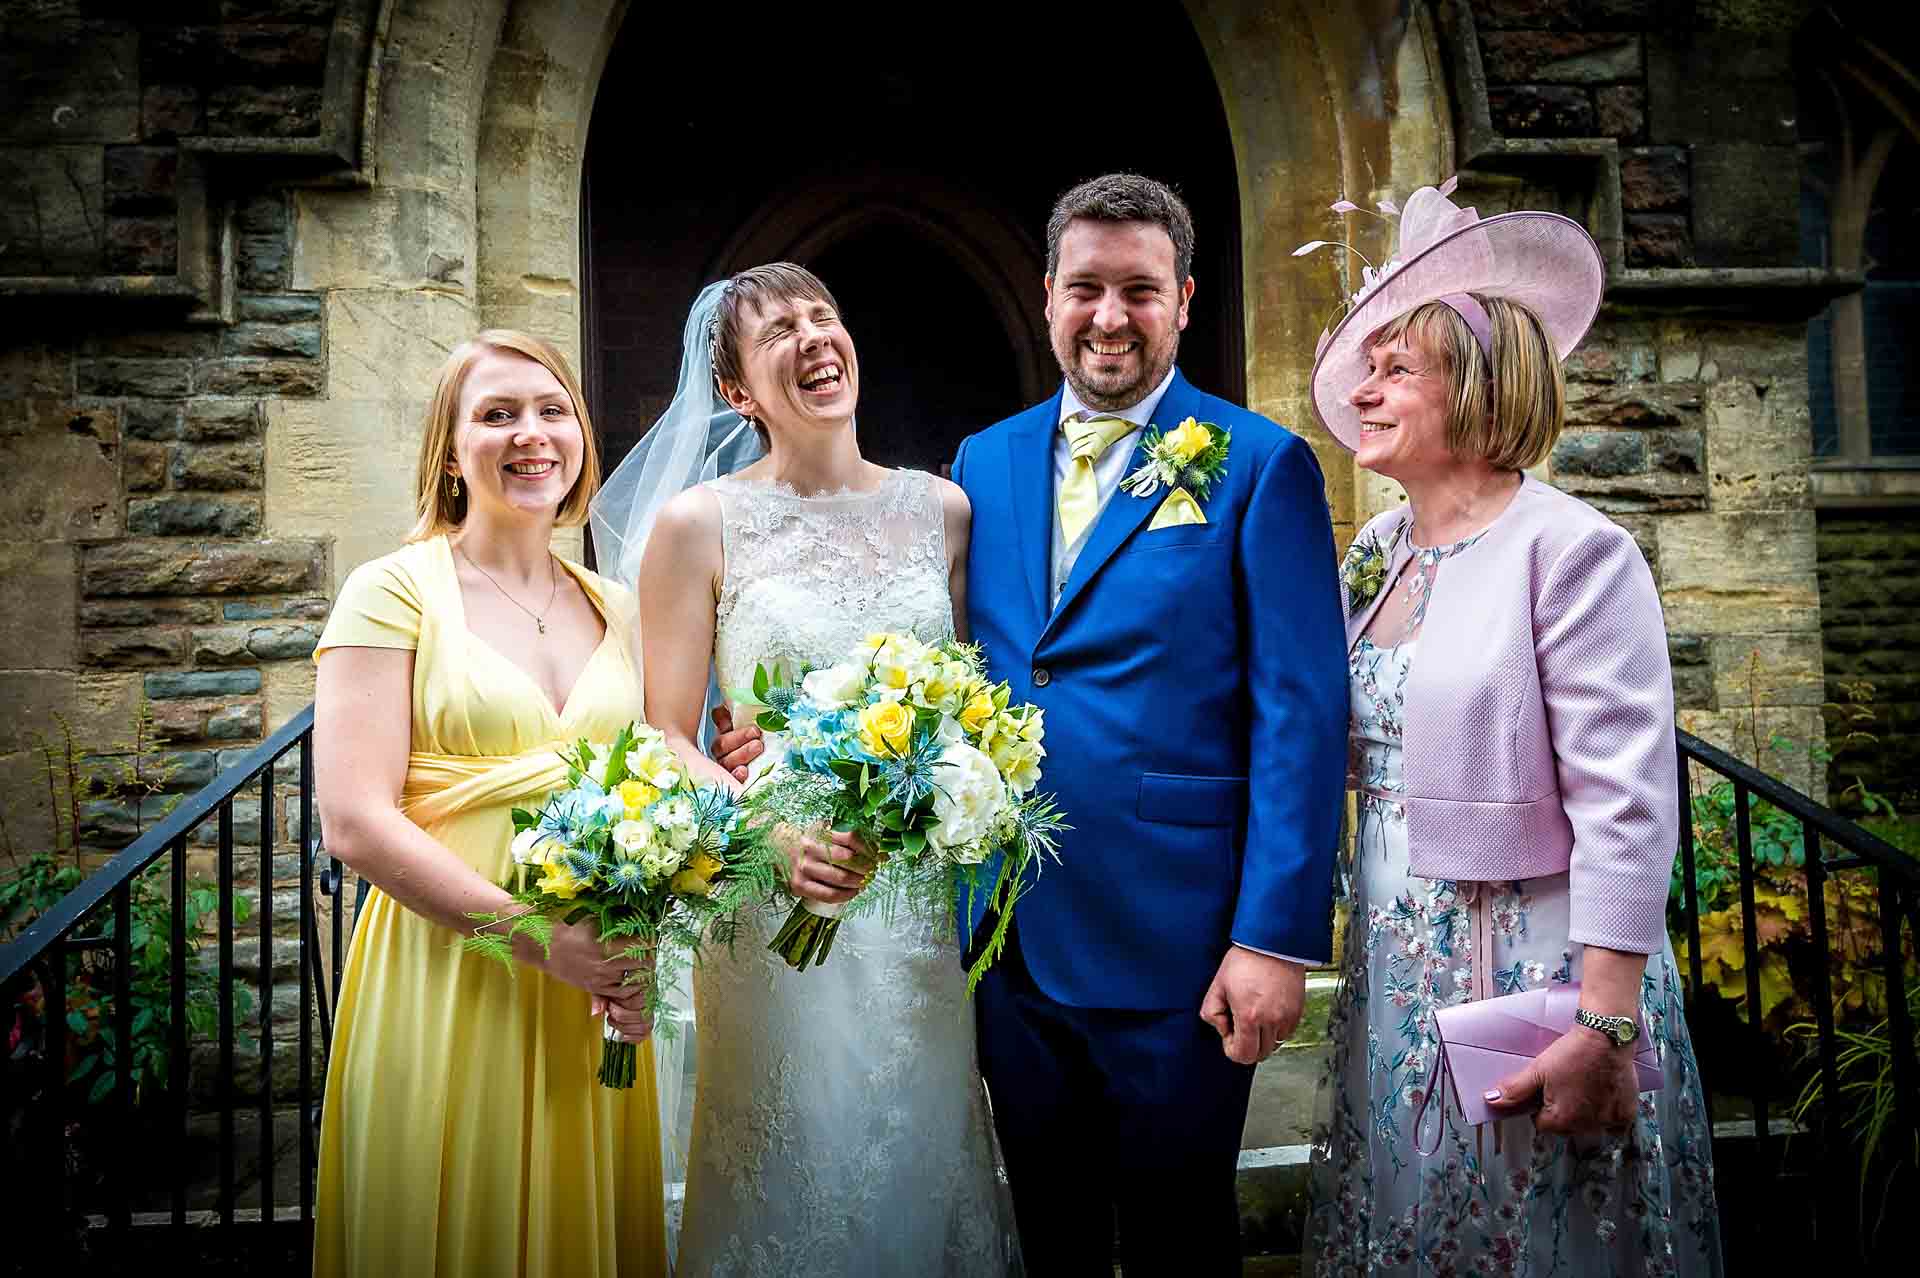 Family Group Portrait Outside Church Door with Bride Laughing